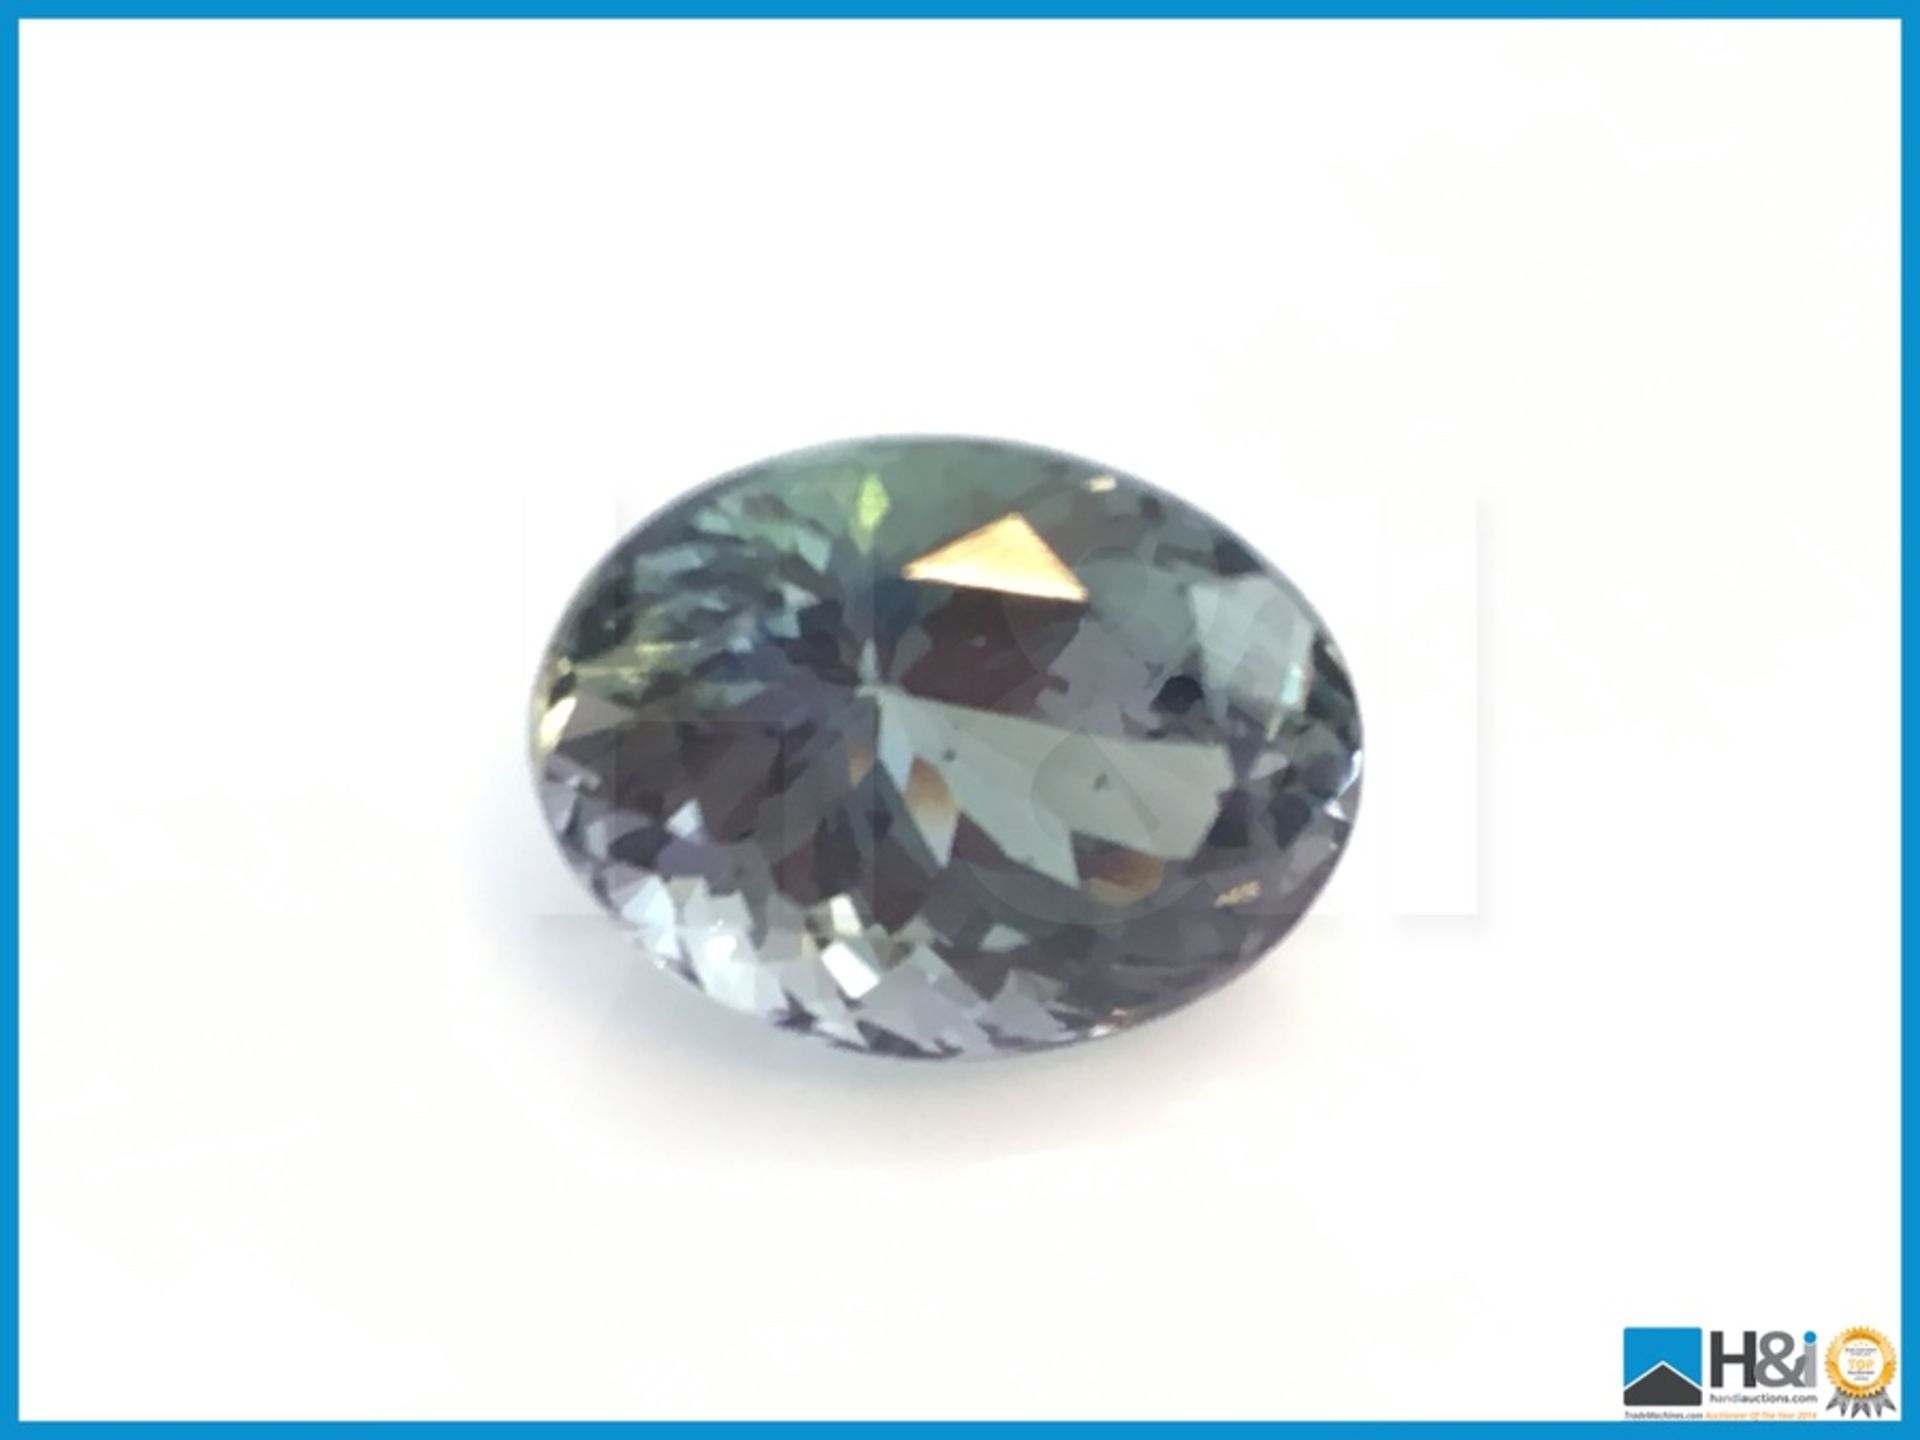 7.57ct Zoisit,Oval Fancy Cut in Violetis Green. Transparent with IGI Certificate 12.99x9.80x8.